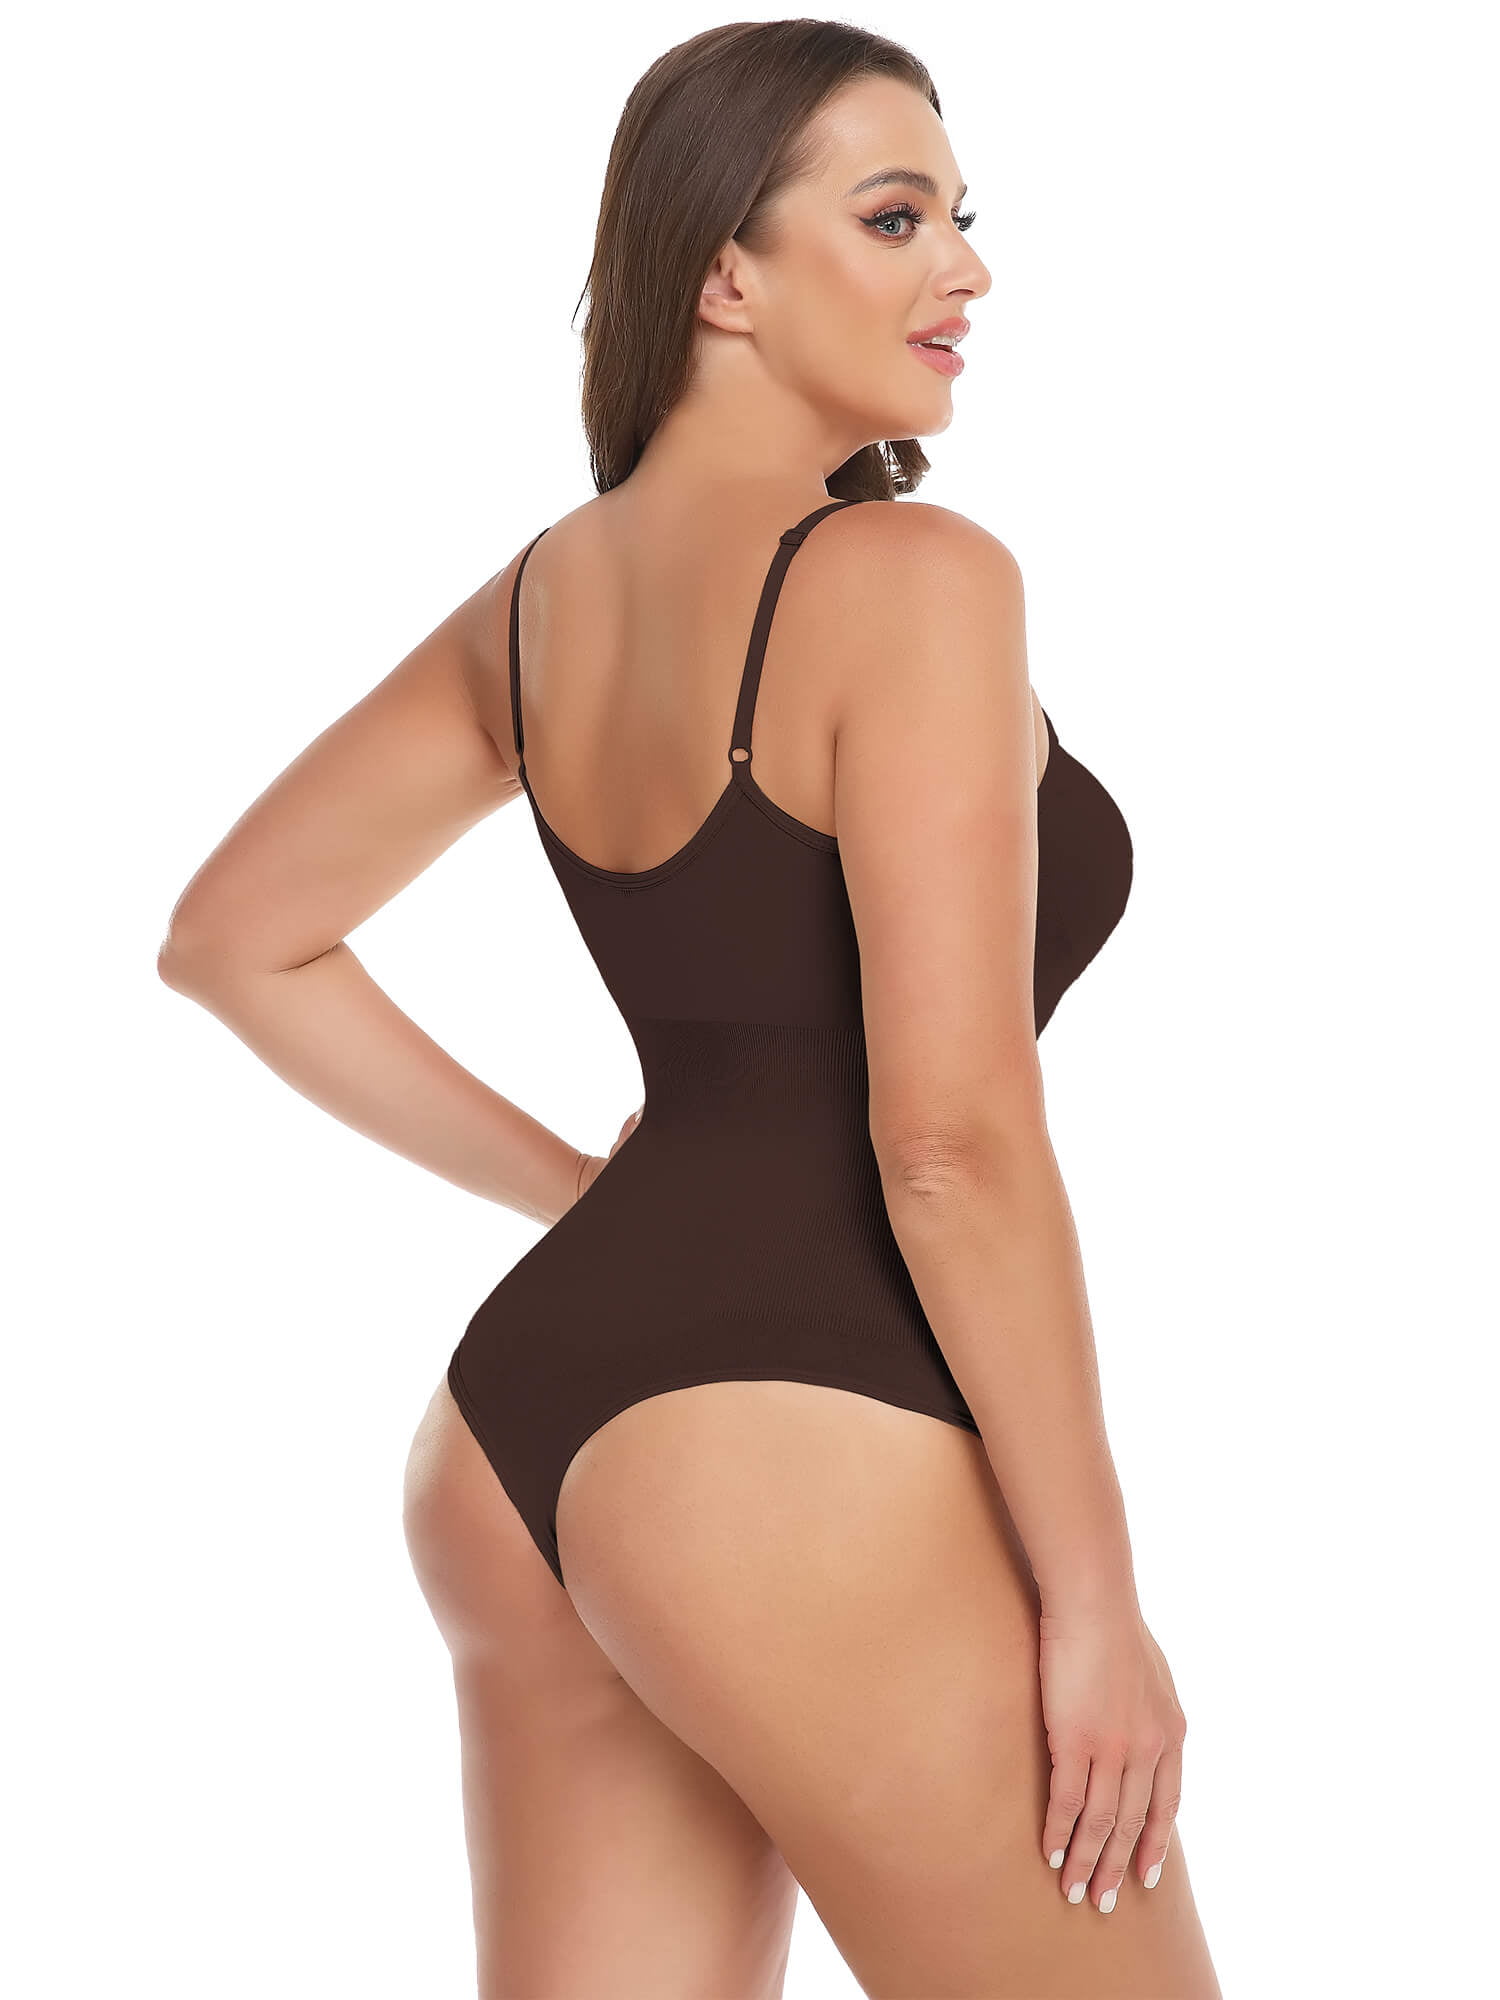 Womens Tummy Control Bodysuit Backless, Low Back, Sculpting Thong Bodysuit  Shaper With Waist Cinchers And Shaping Leotard Top From Men04, $12.78